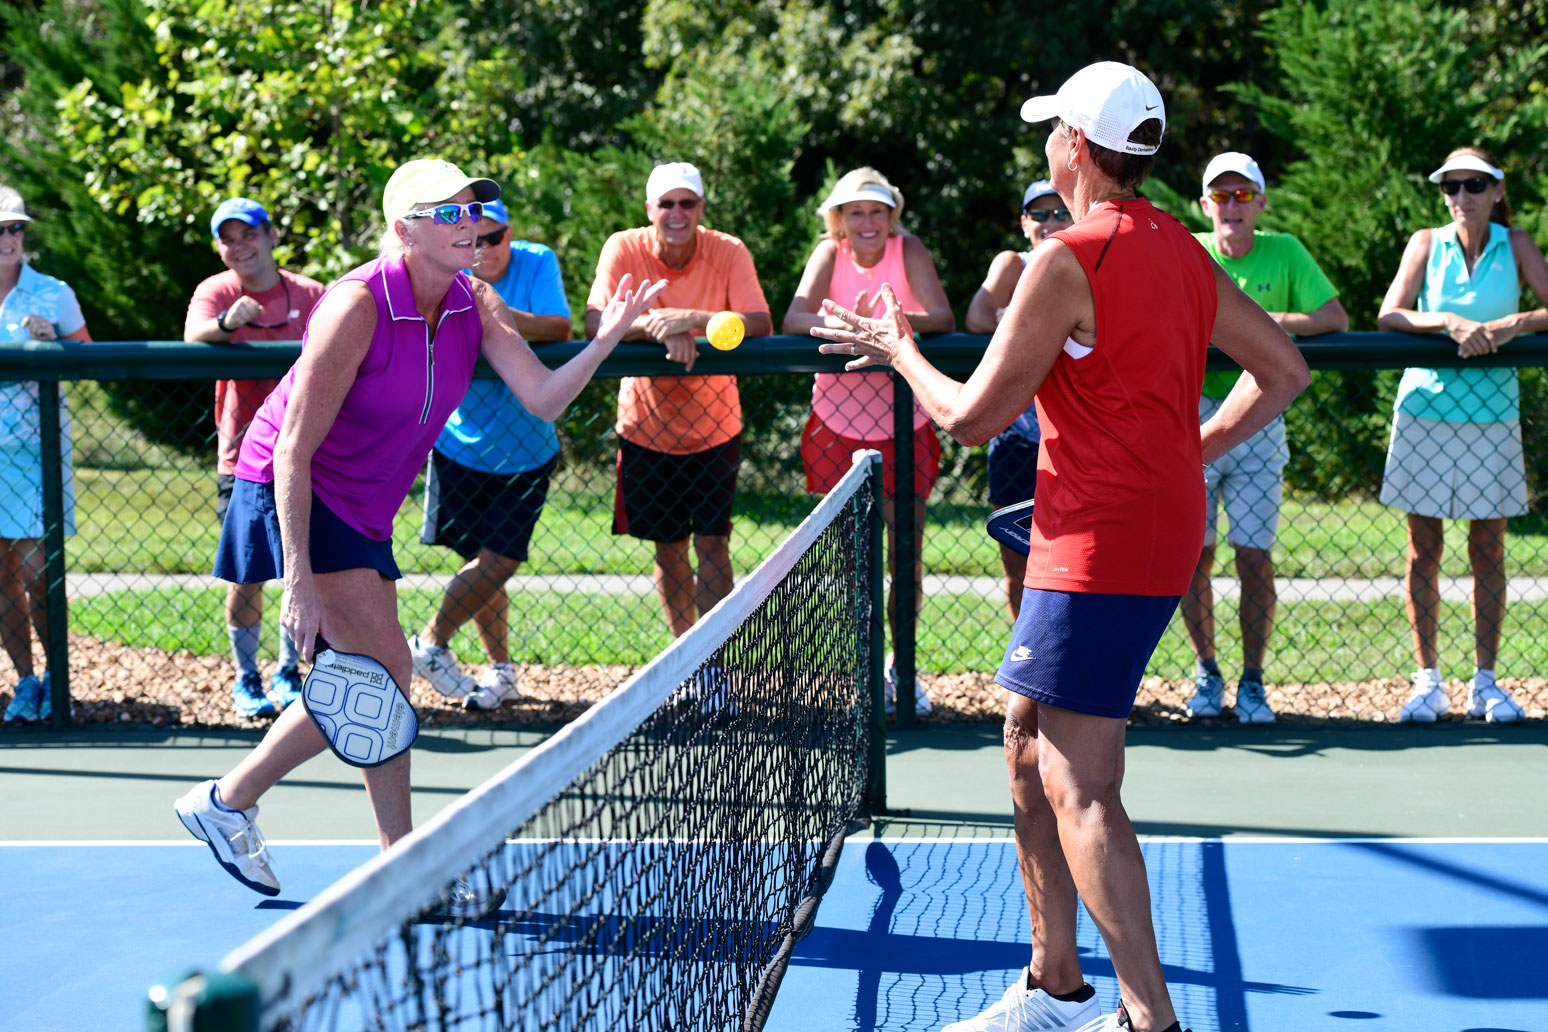 Spectators watching their fellow members of the pickleball club play a game.